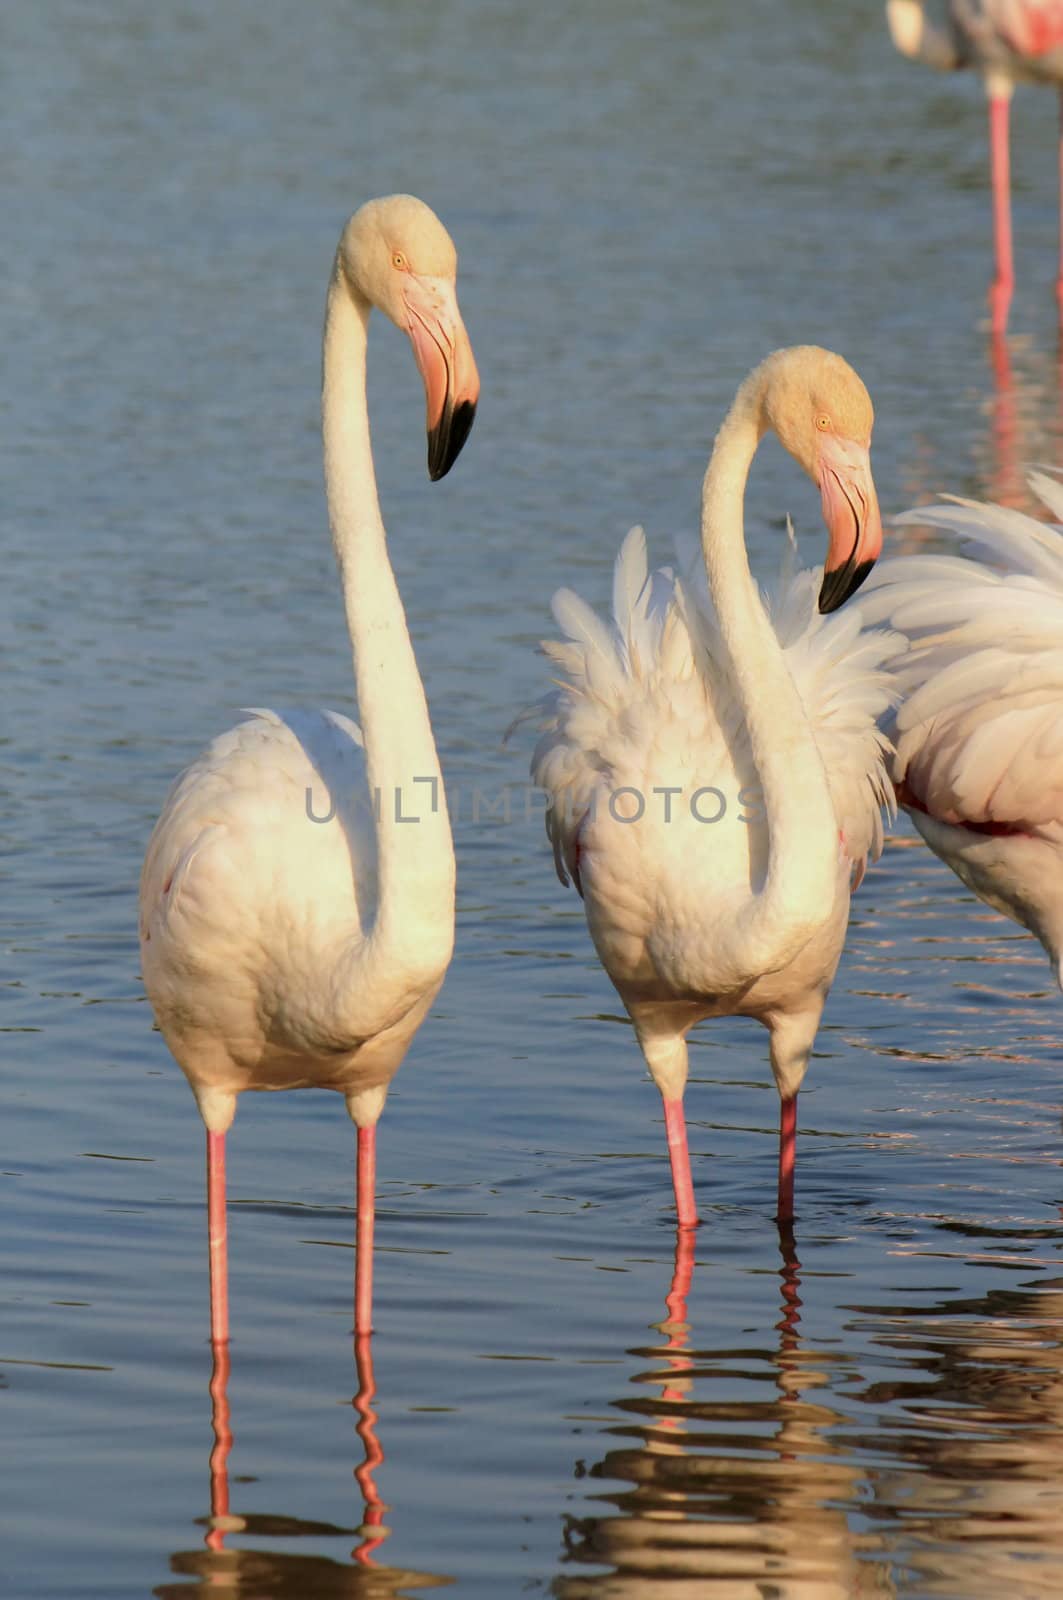 White flamingos in the water by sunset